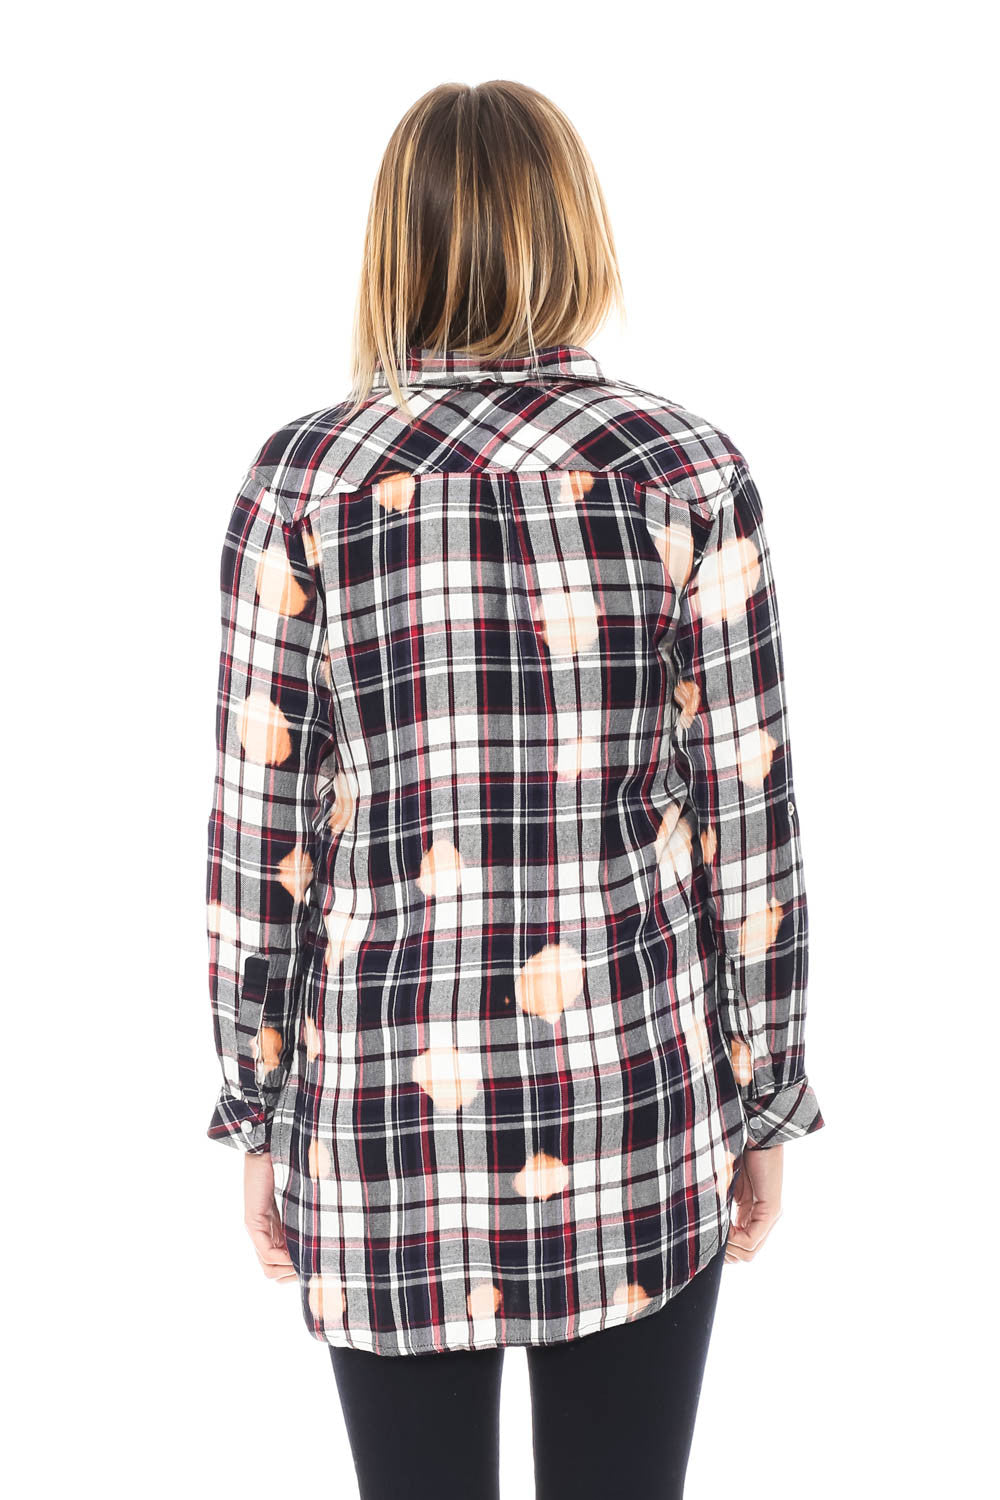 Tunic - 1/4 Button Up Bleached Out Plaid Top (Final Sale)